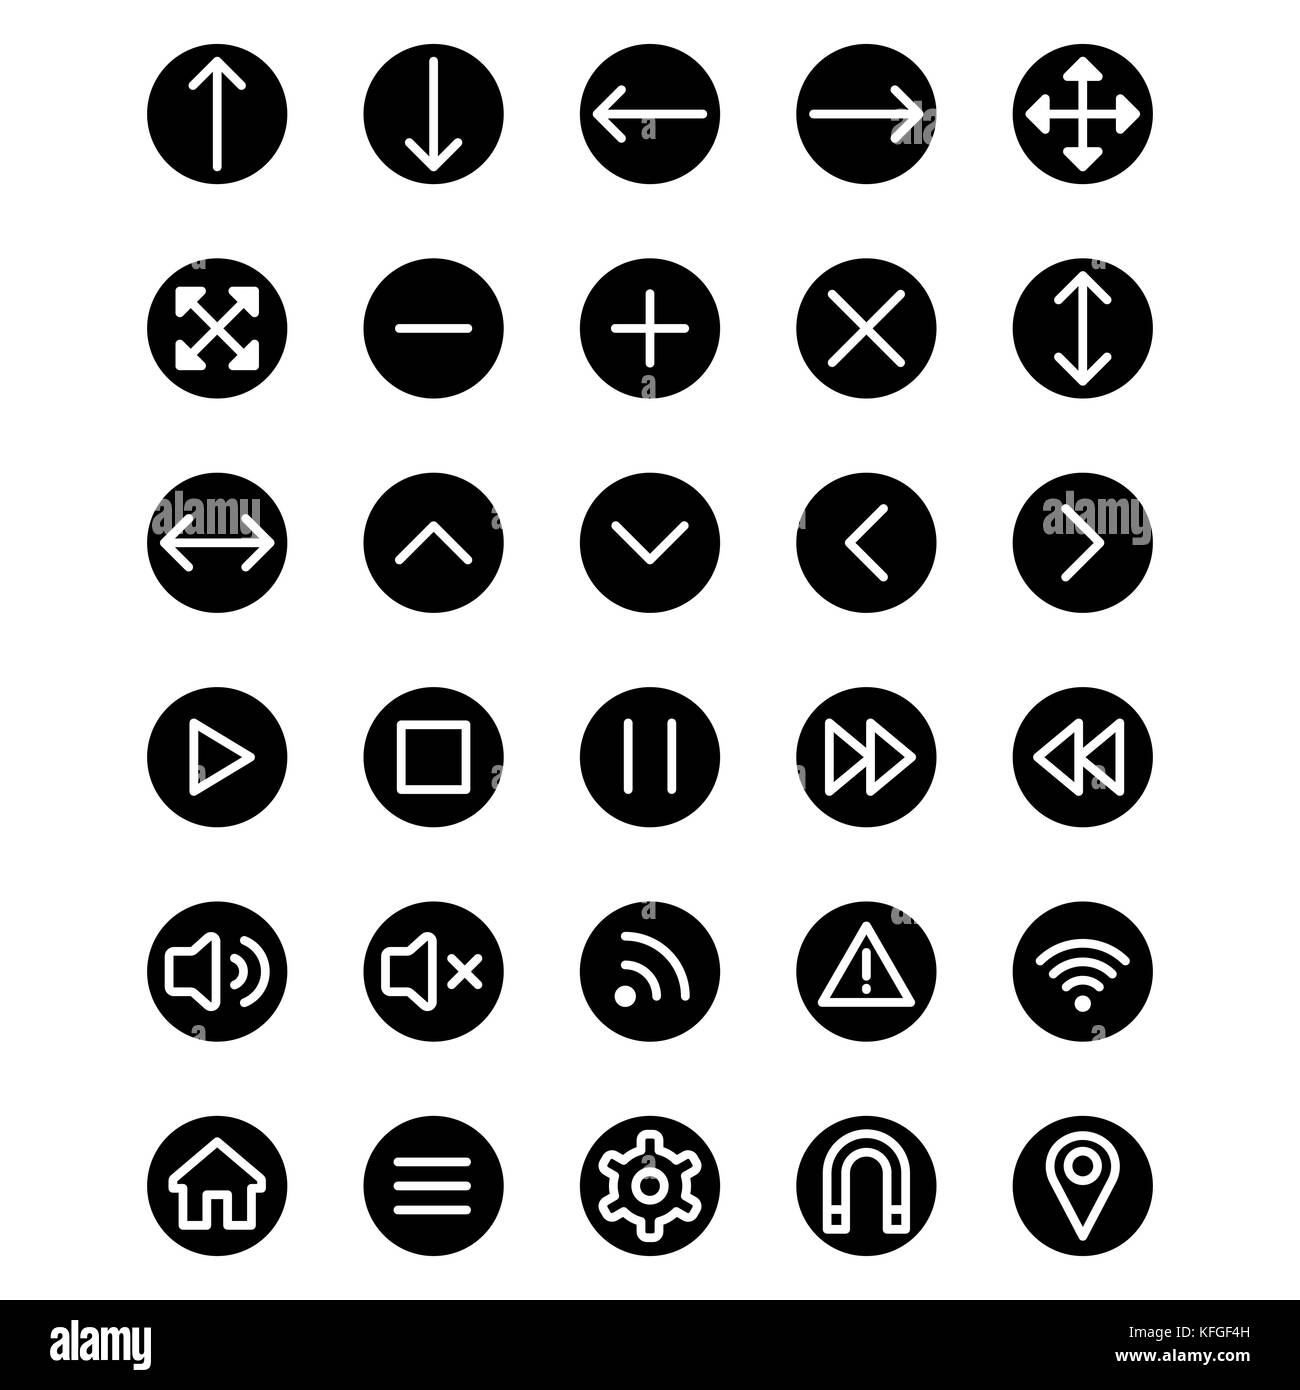 Web icons set for internet and applications. Stock Vector